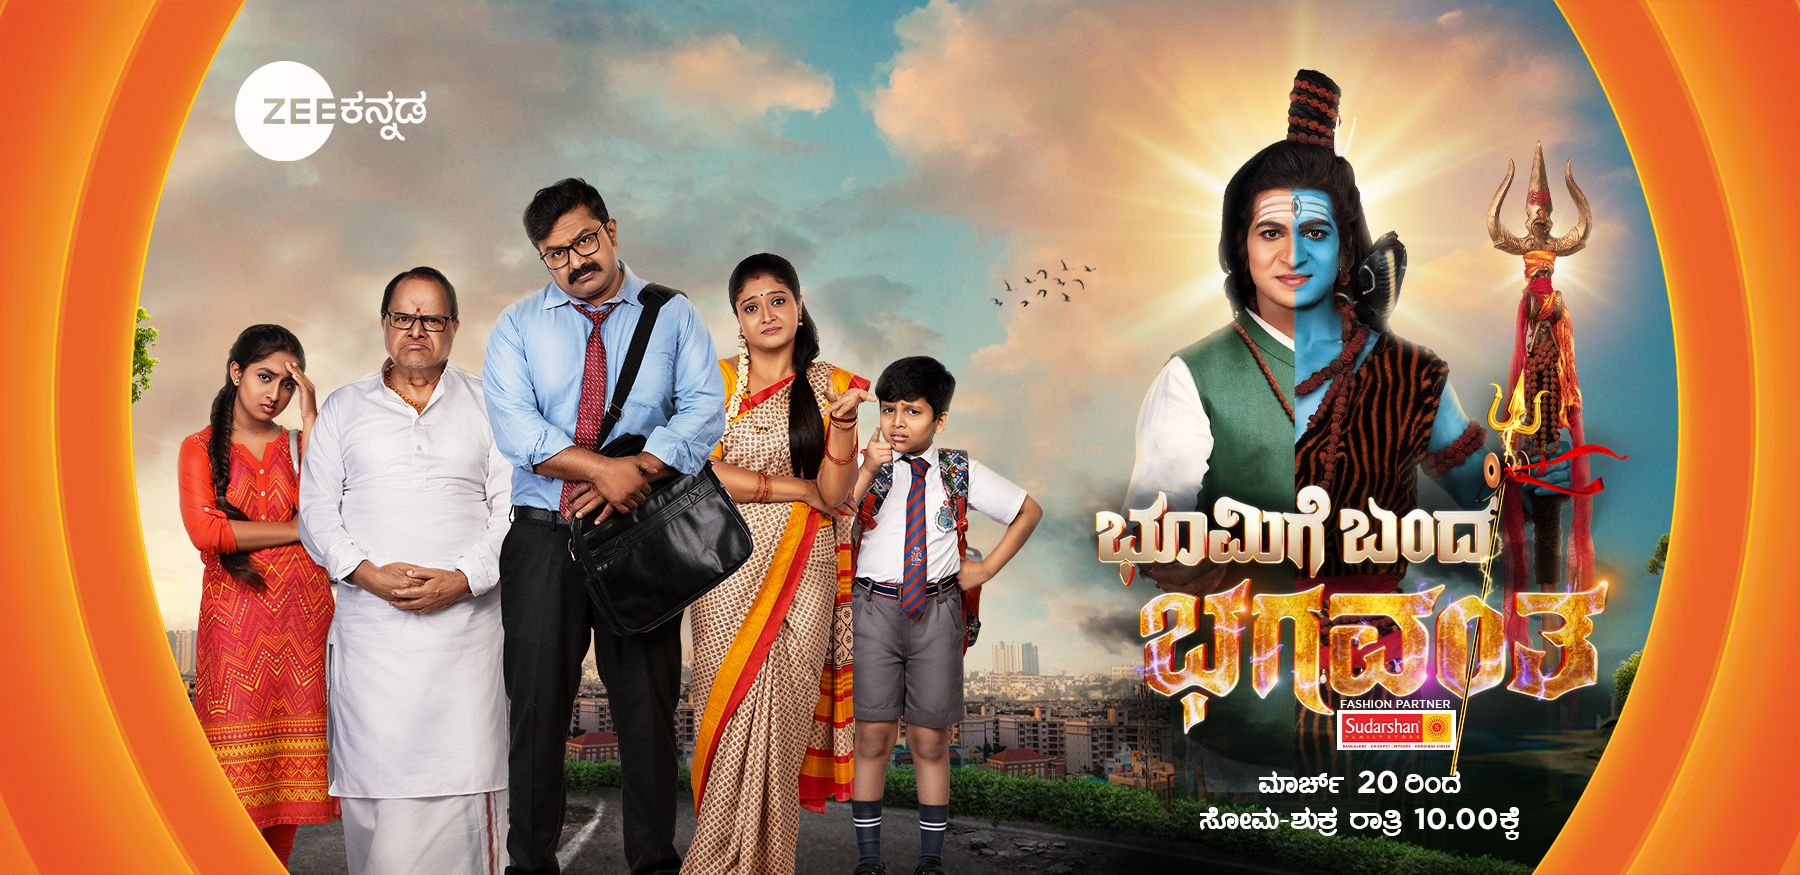 Srirasthu Shubhamasthu Serial On Zee Kannada Channel from 31st October at 08:30 PM 20